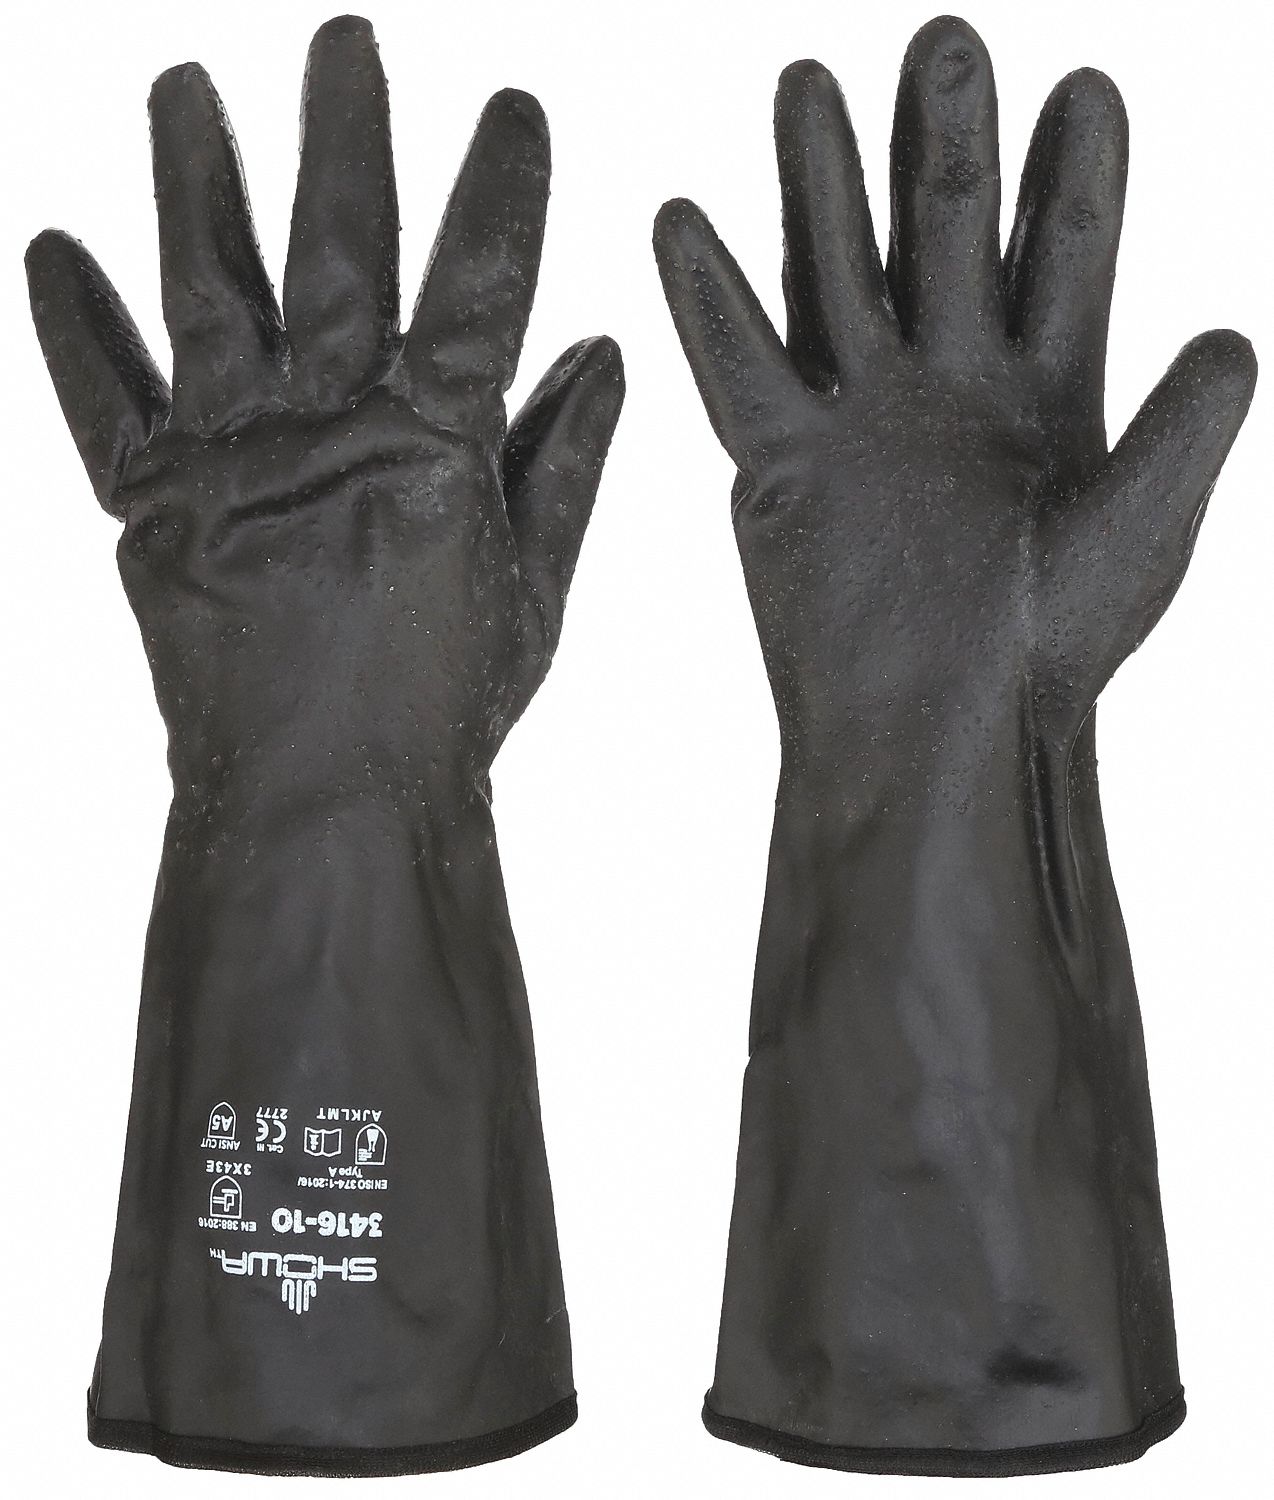 ANSI/ISEA Cut Level A5, 67.32 mil Glove Thick, Chemical Resistant ...